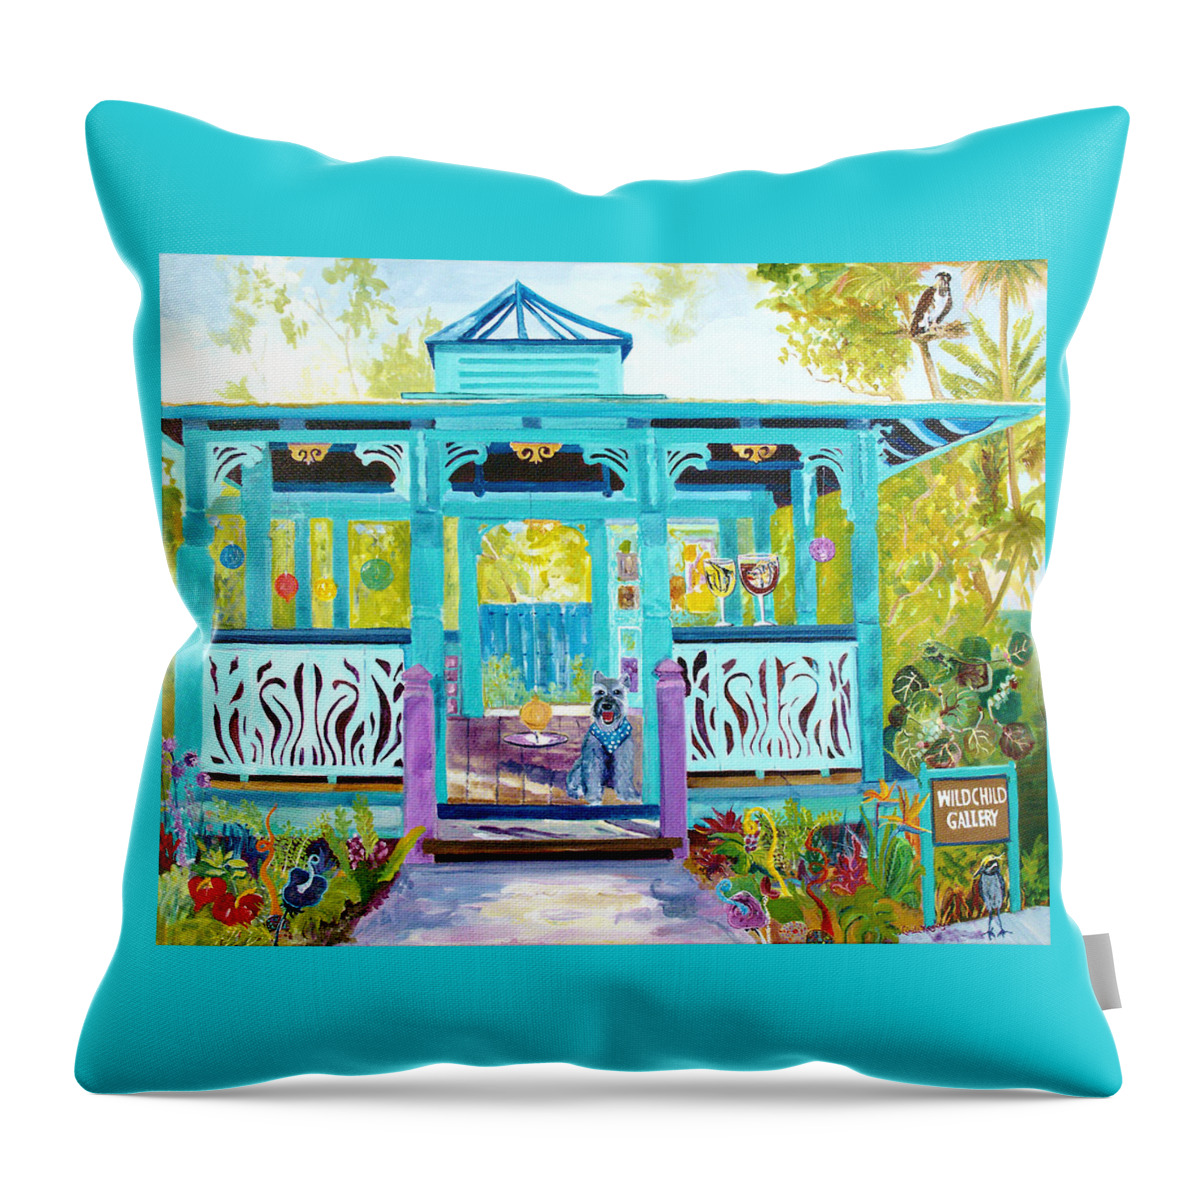 Wild Child Gallery Throw Pillow featuring the painting Gazebo Greeters at Wild Child by Linda Kegley